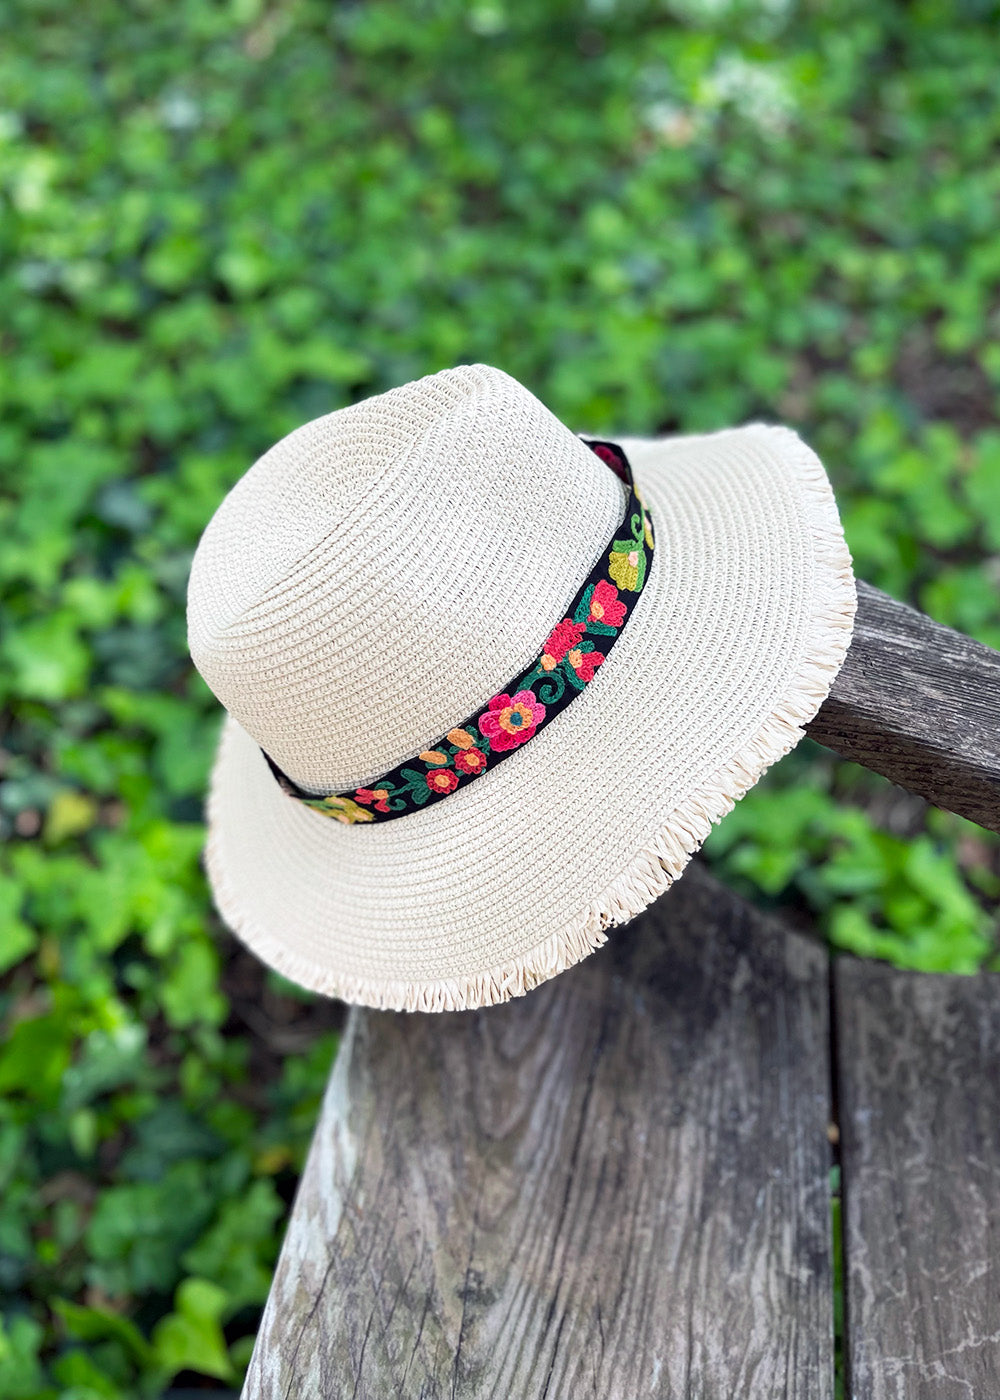 The Cutest Straw Sunhat with Embroidered Hatband